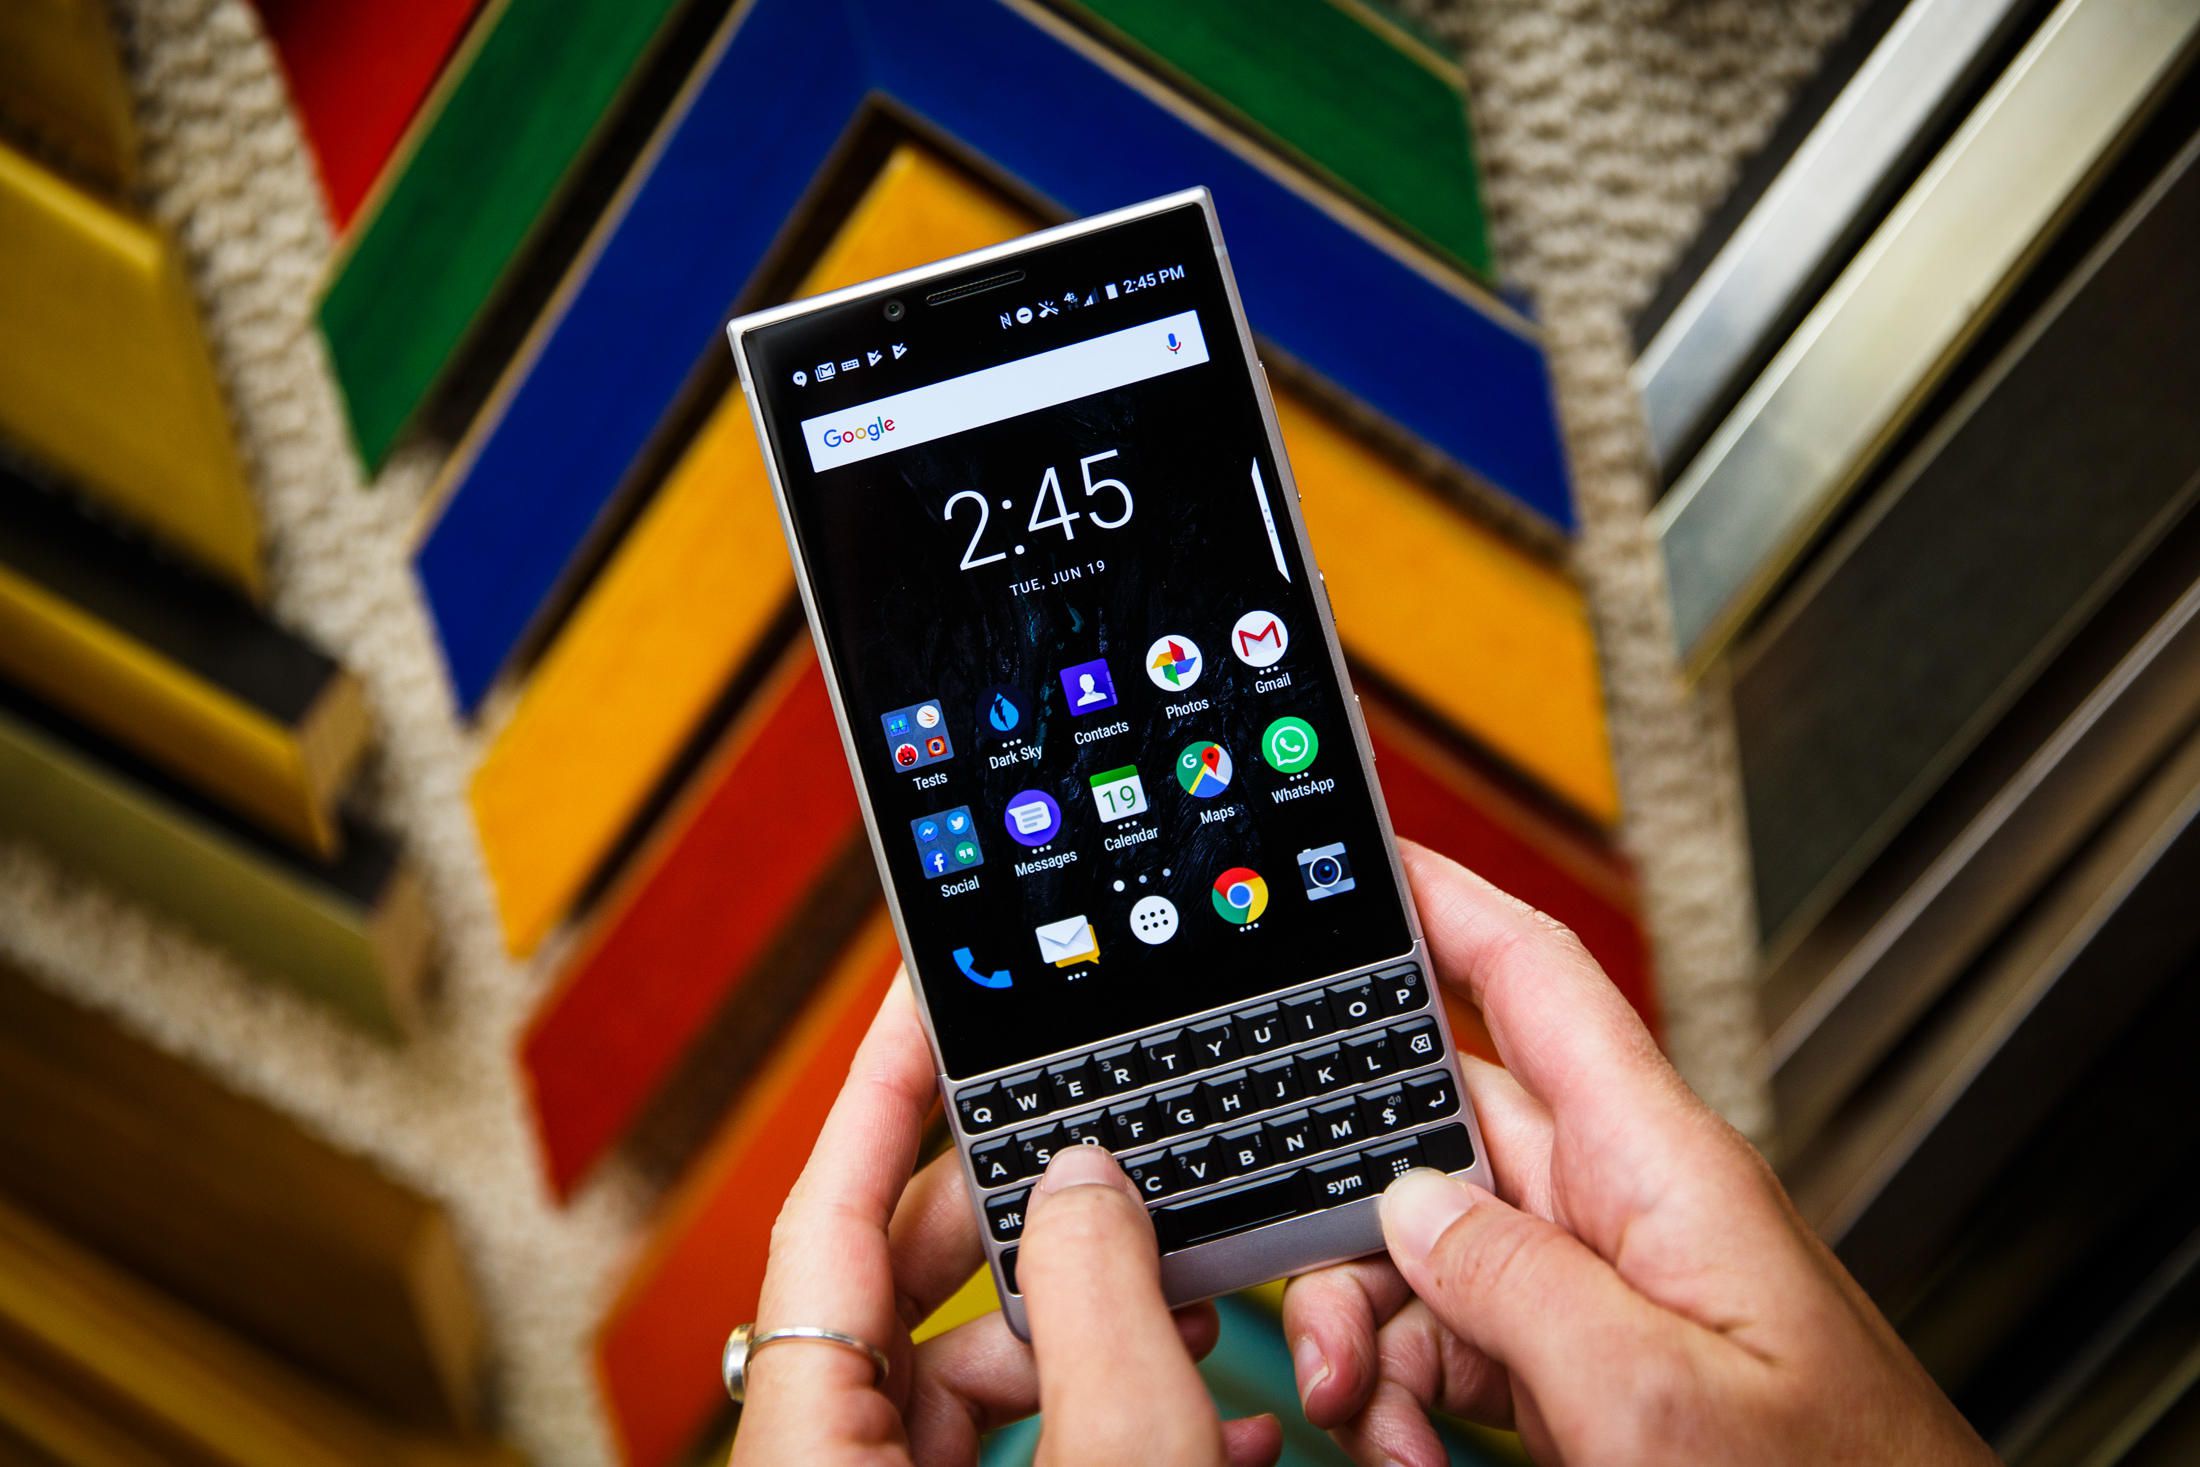 BlackBerry KEY2 has been launched in Canada